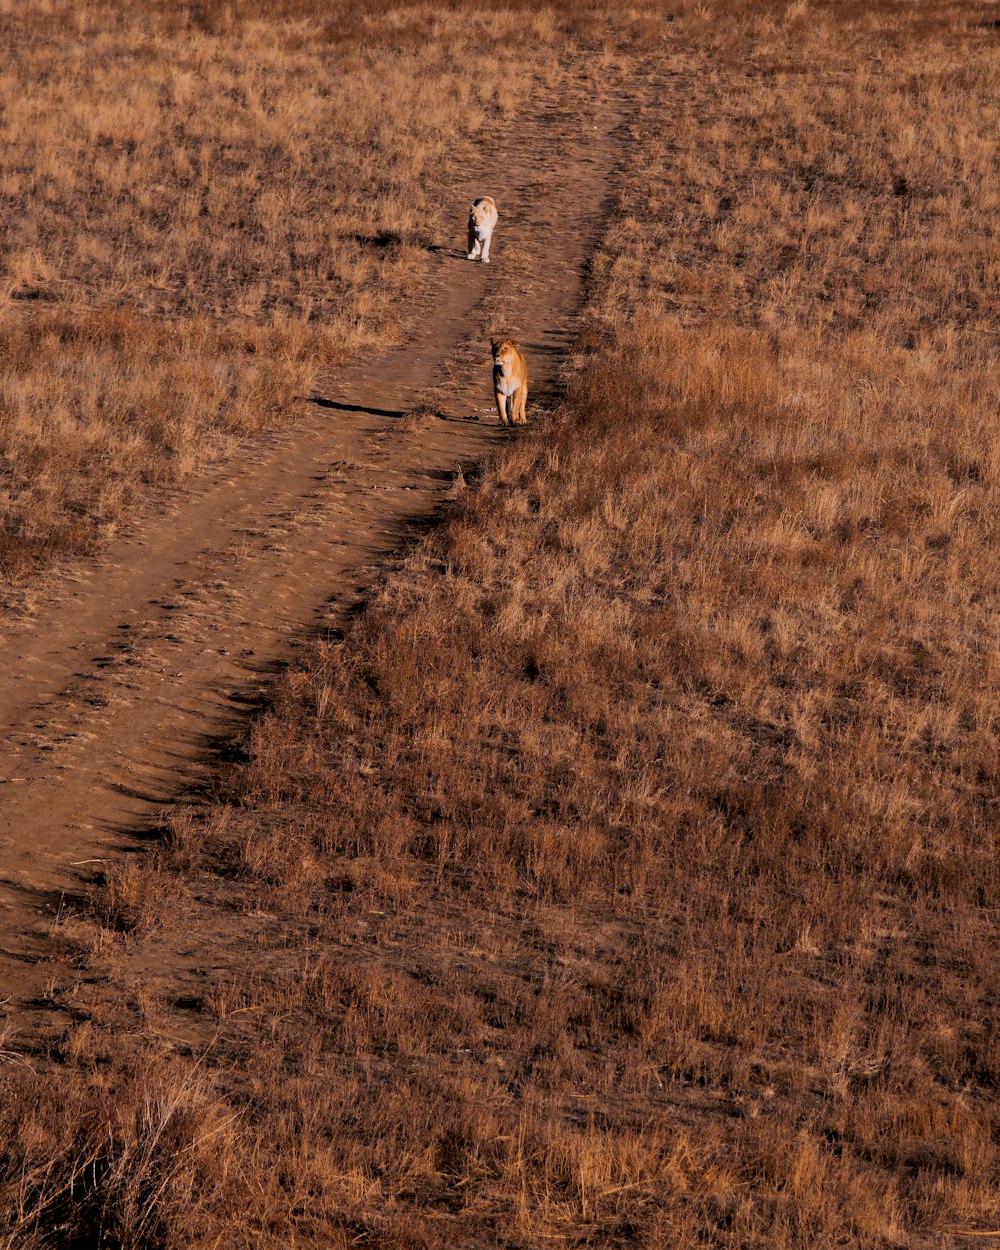 a couple of dogs walking down a dirt road